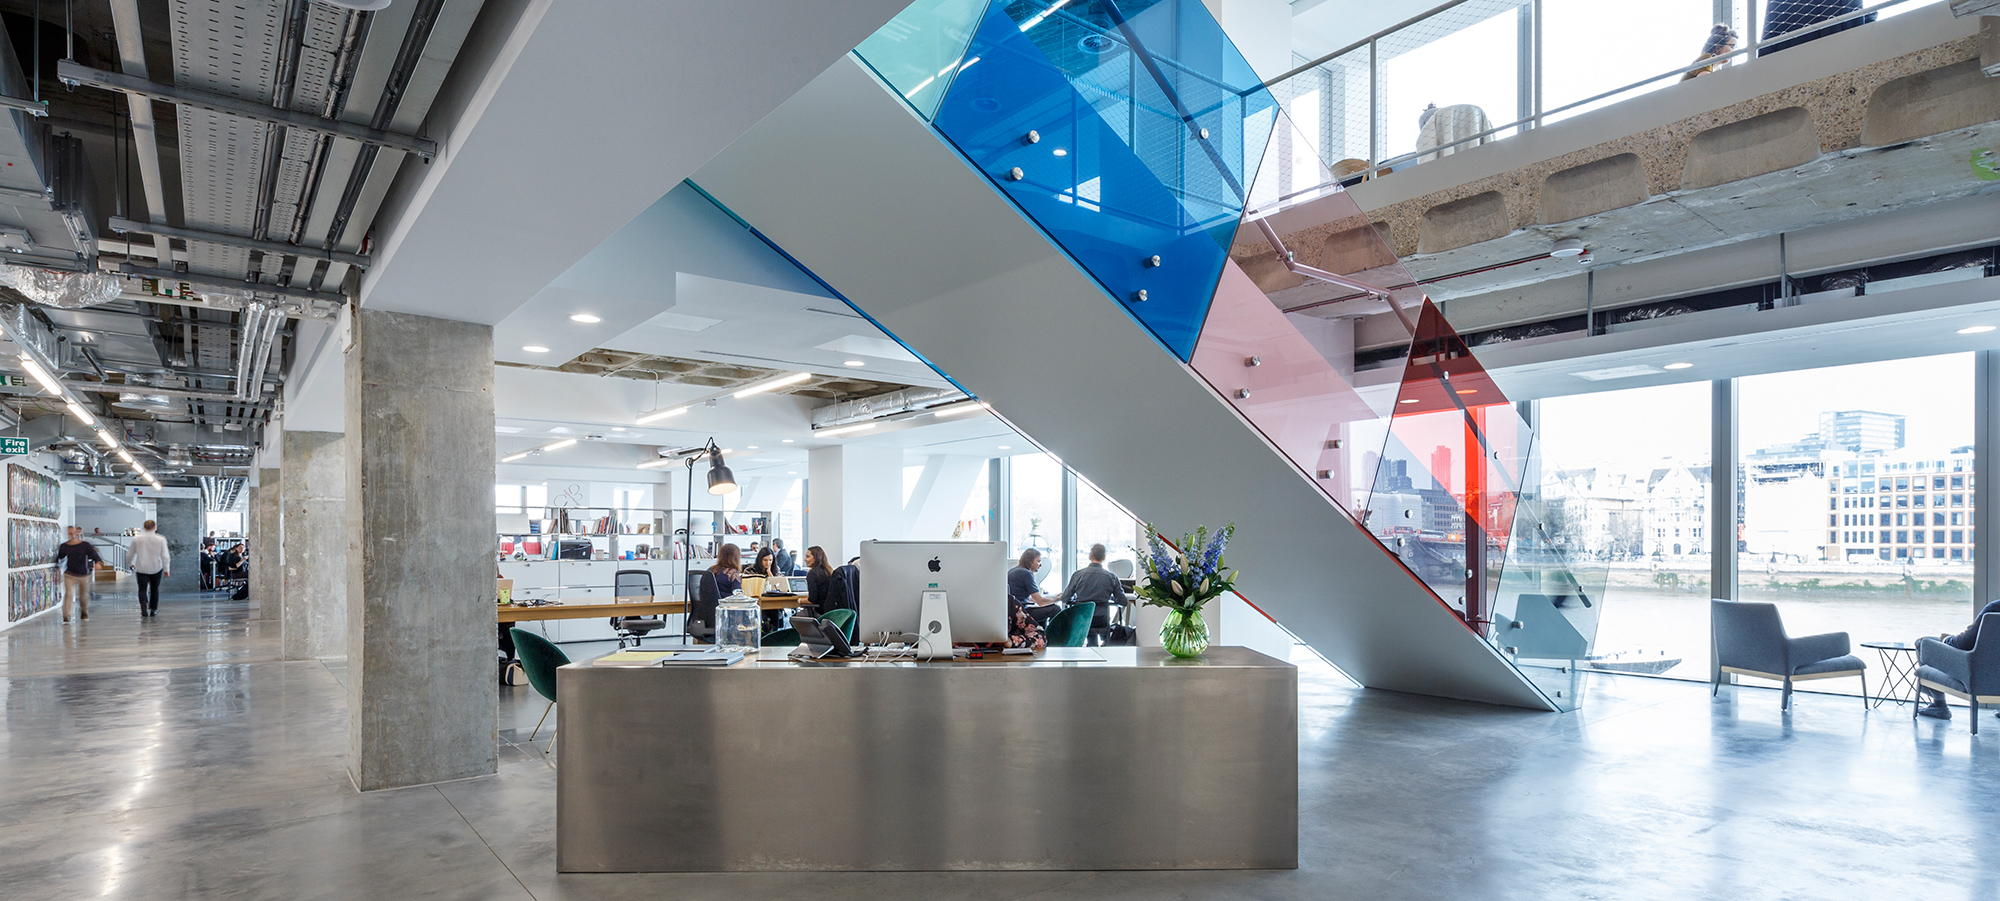 SEA CONTAINERS HOUSE – OGILVY & MEC GROUP NEW HQ, London